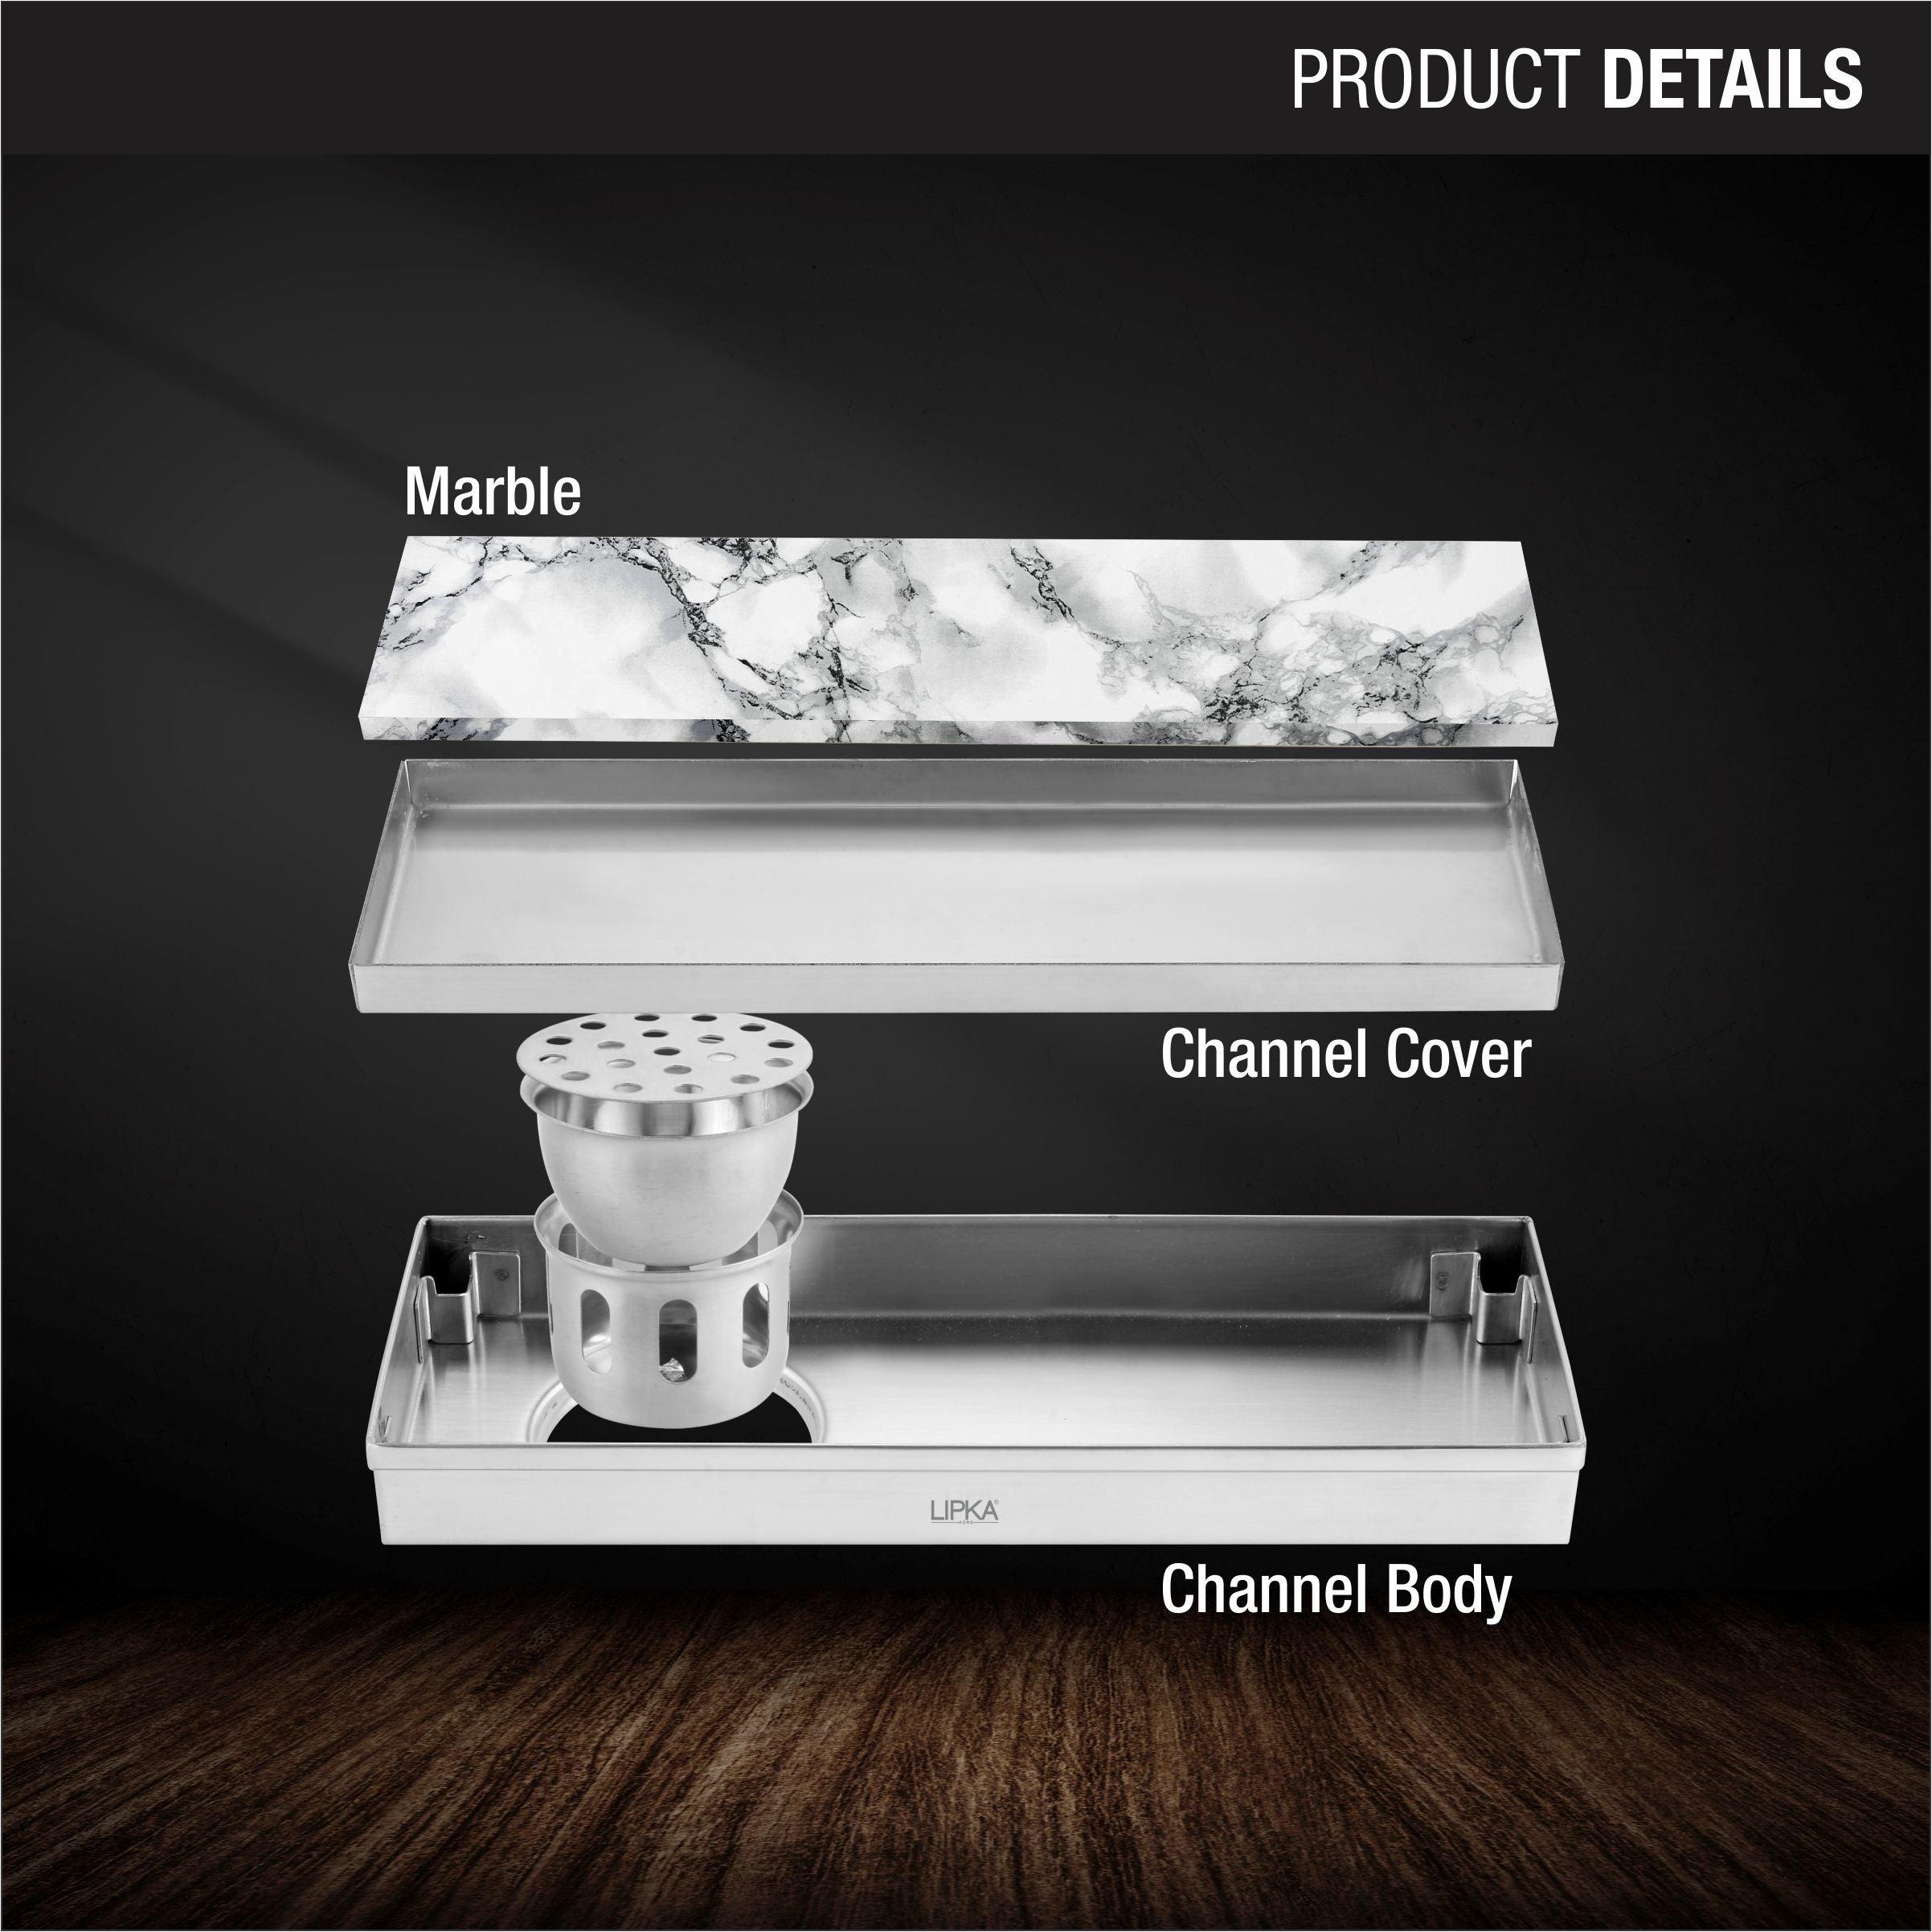 Marble Insert Shower Drain Channel (12 x 3 Inches) product details